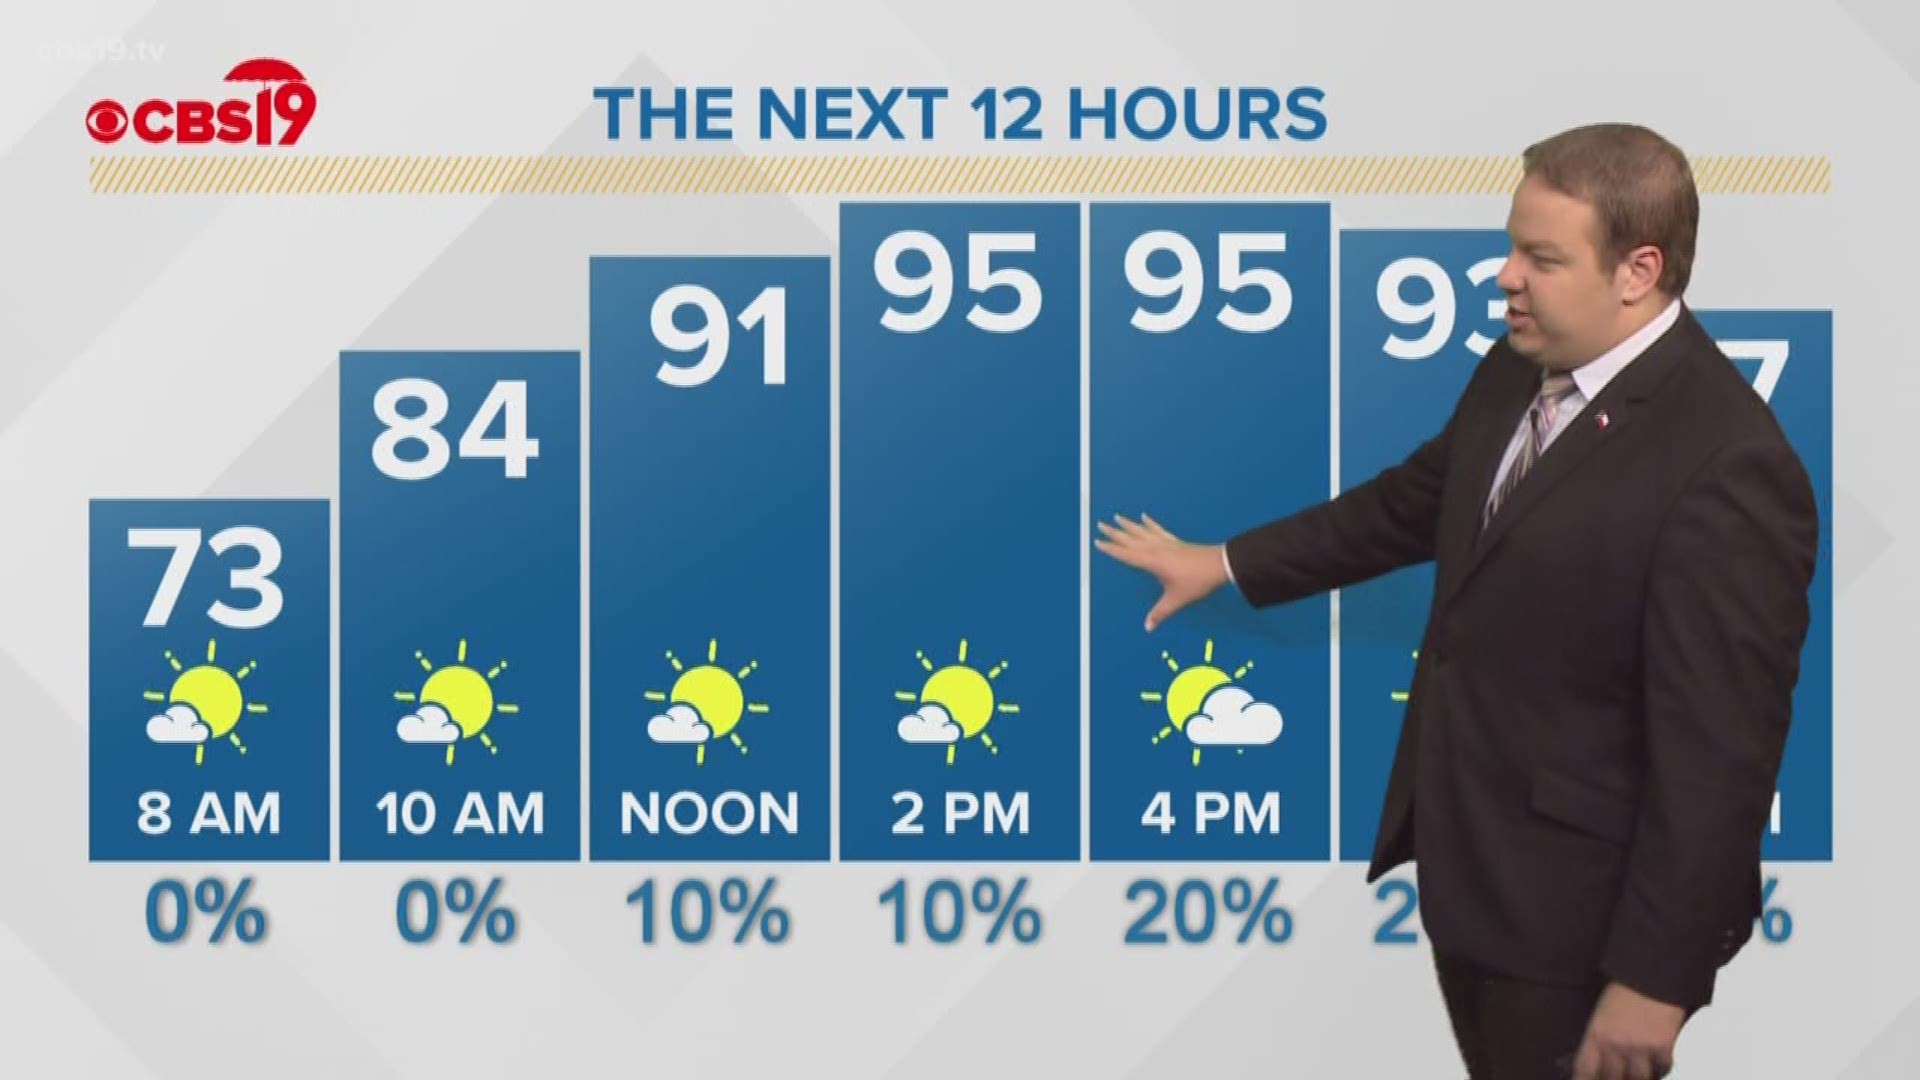 There are some small chances for rain and storms in the forecast, but the vast majority of us should stay dry. Hot weather is expected as well. Meteorologist Michael Behrens has the latest.